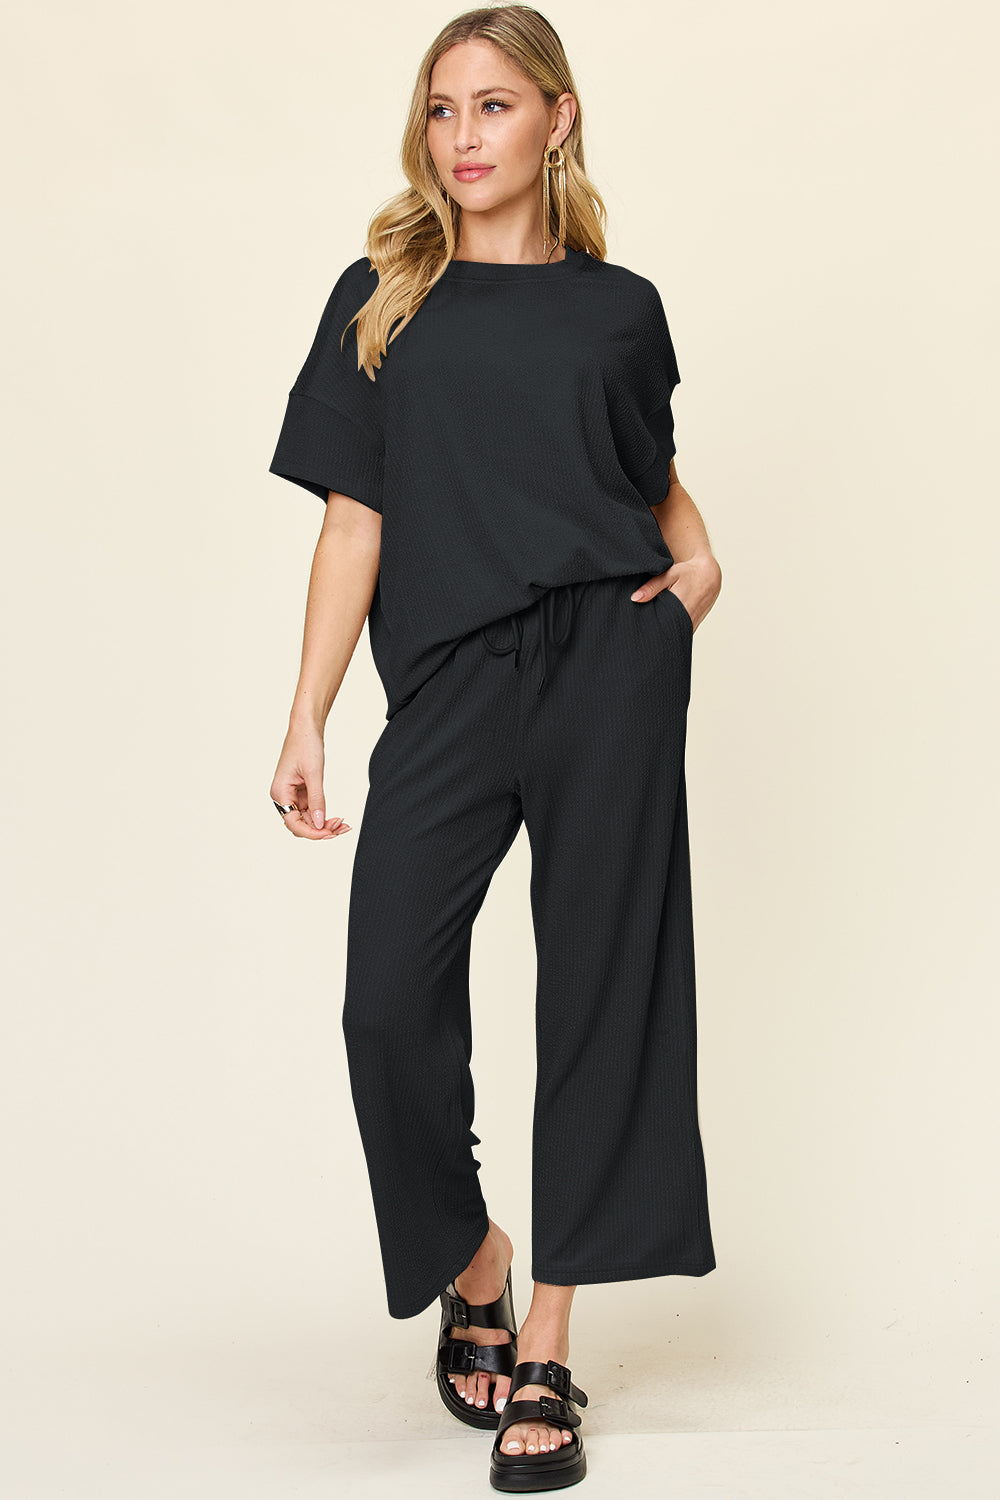 Double Take Full Size Texture Round Neck Short Sleeve T-Shirt and Wide Leg Pants Southern Soul Collectives